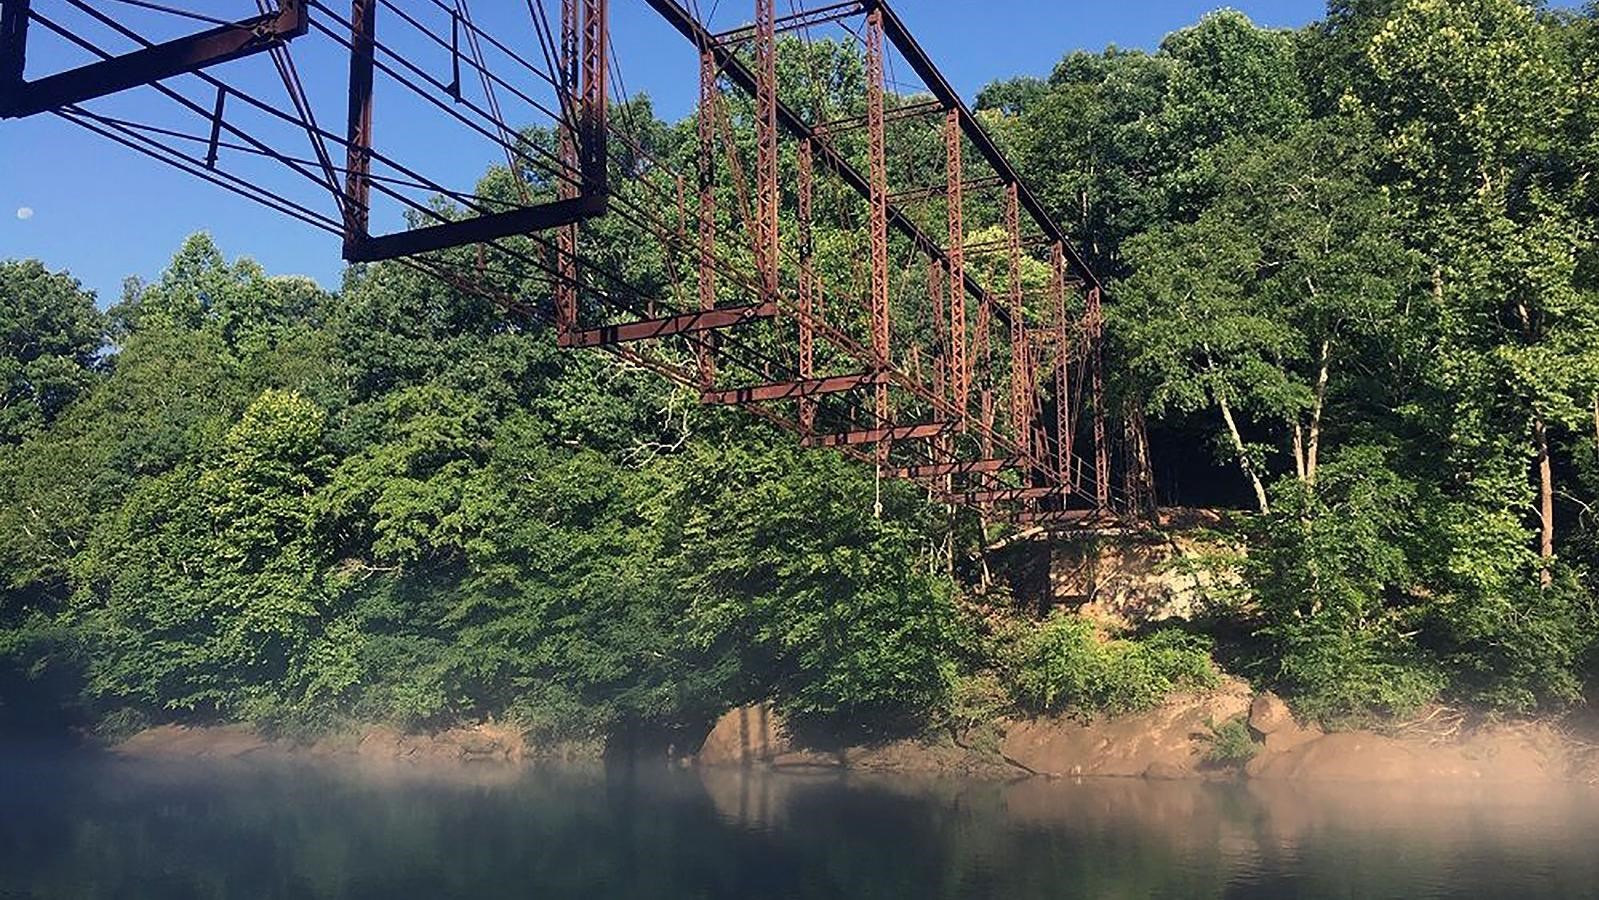 View looking up at steel skeleton of bridge over foggy river with wooded shore in the distance.